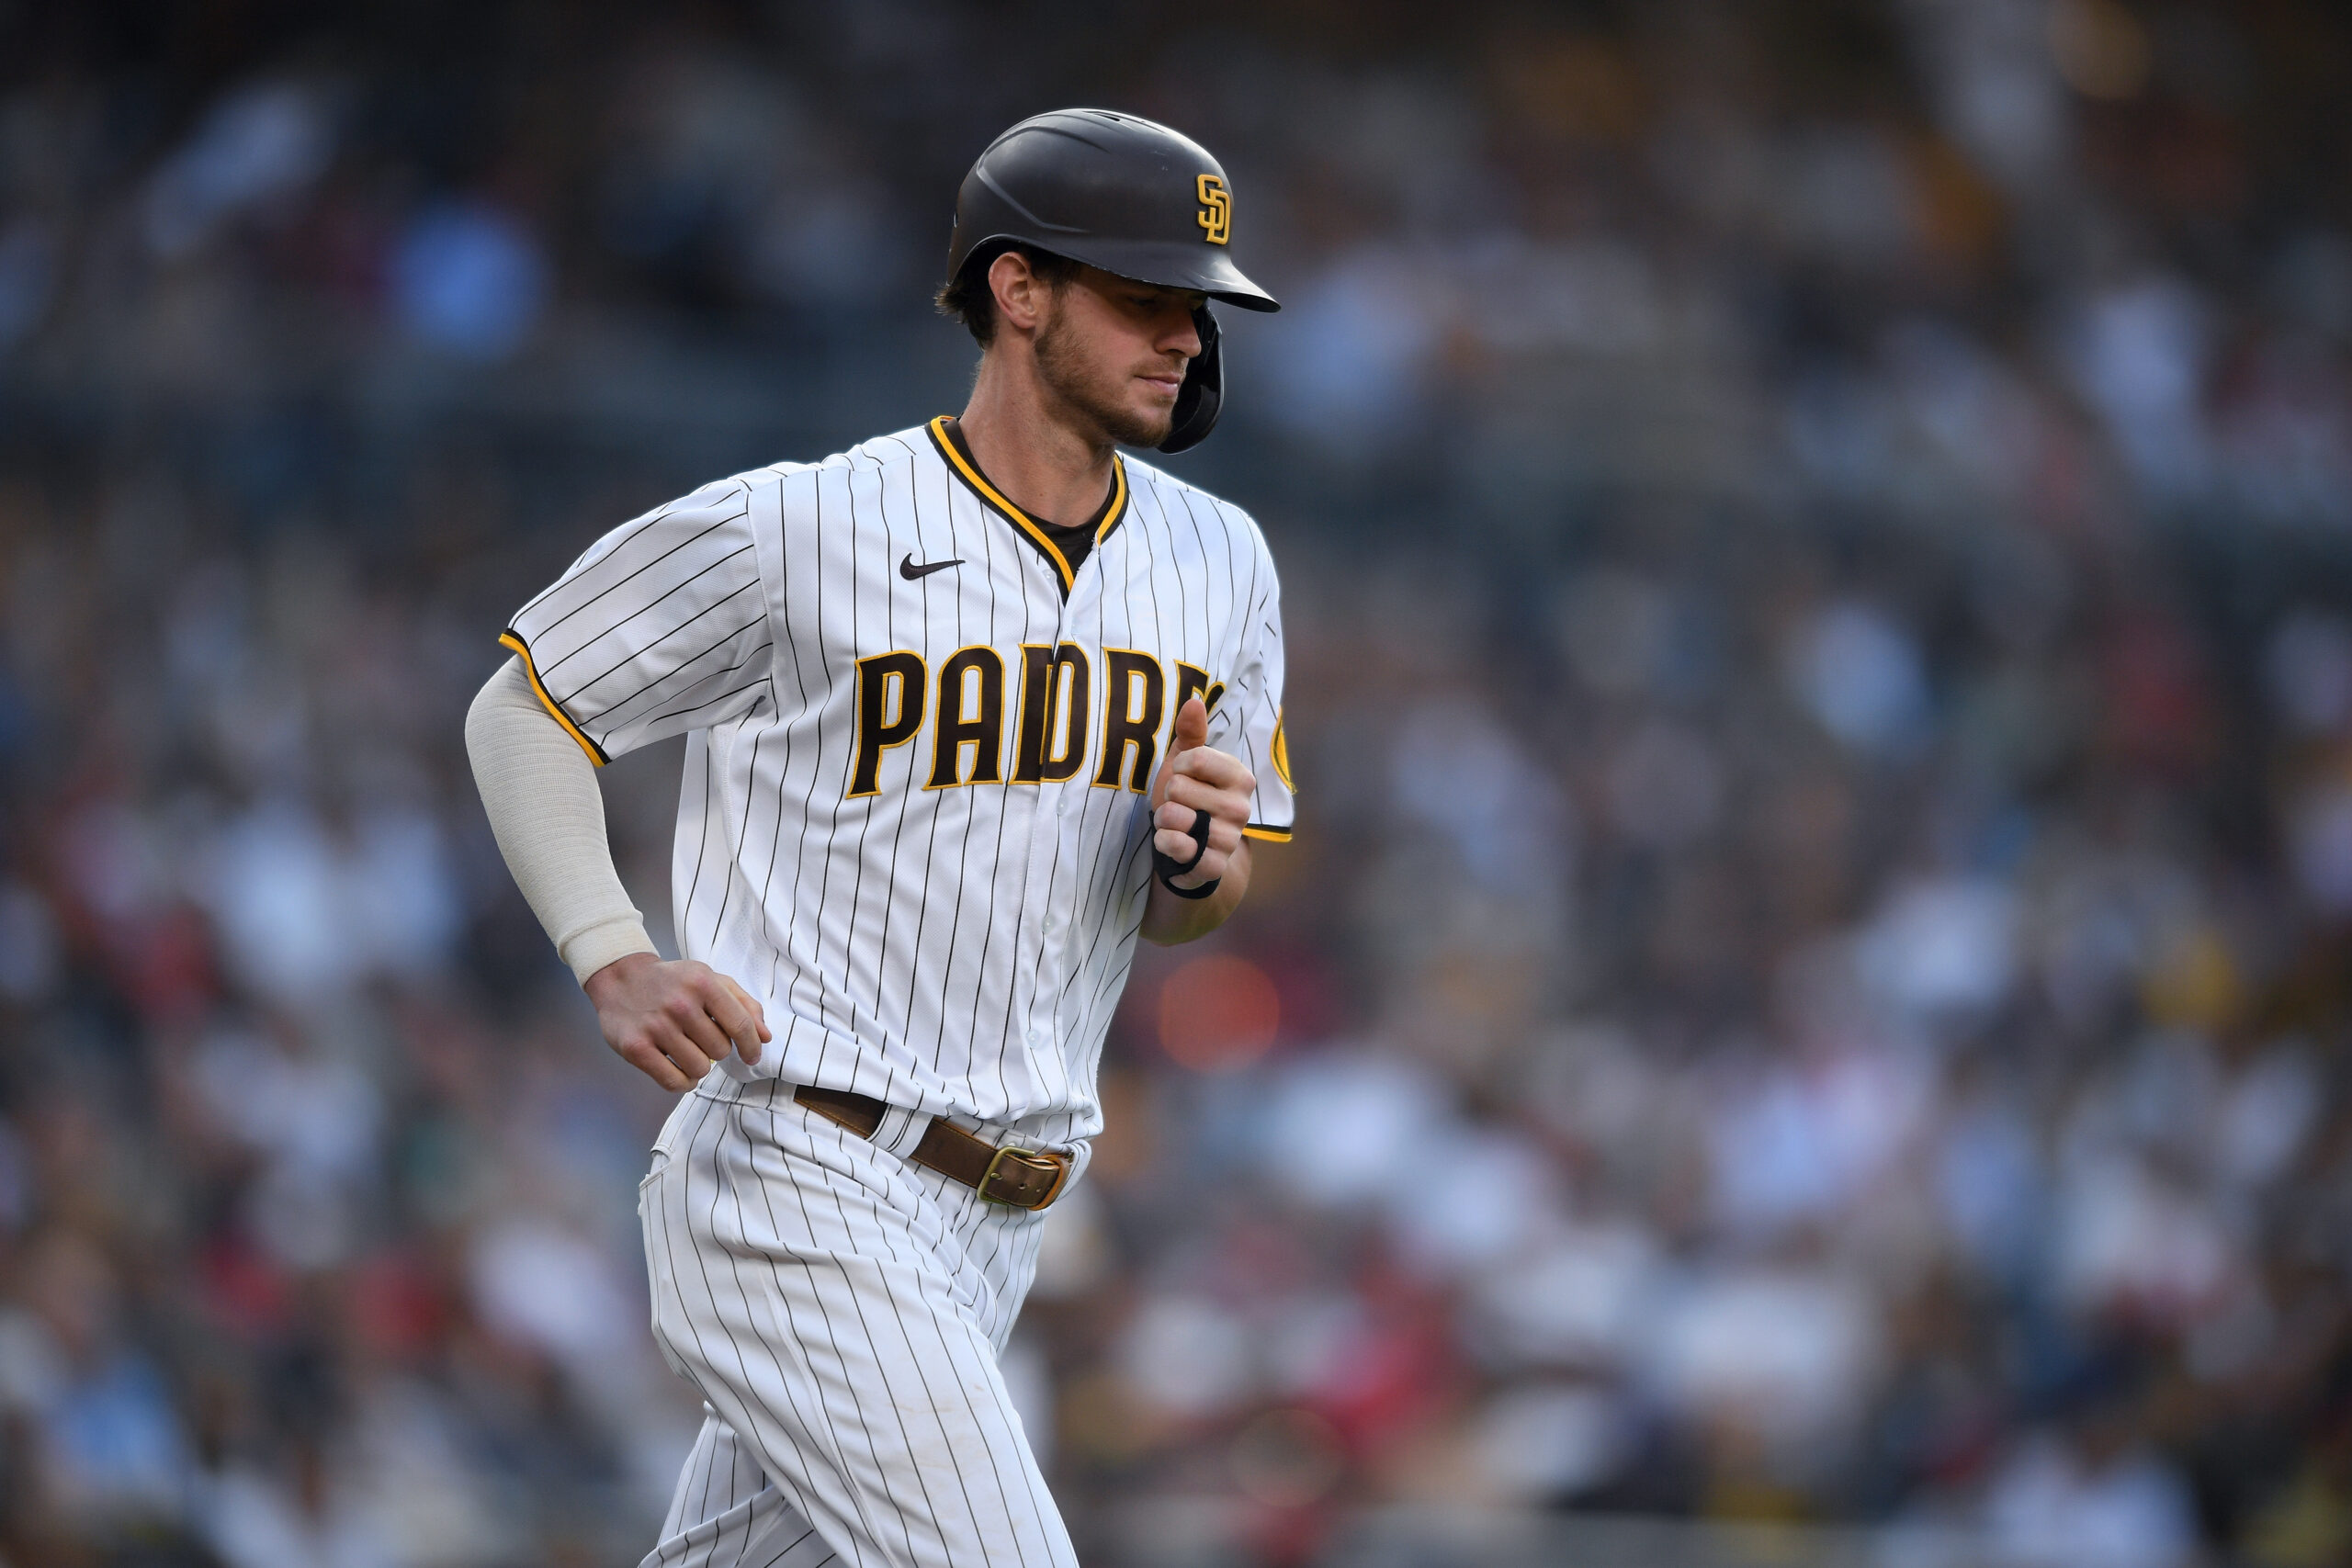 Cronenworth's versatility could make him Padres' “26th man”, by FriarWire